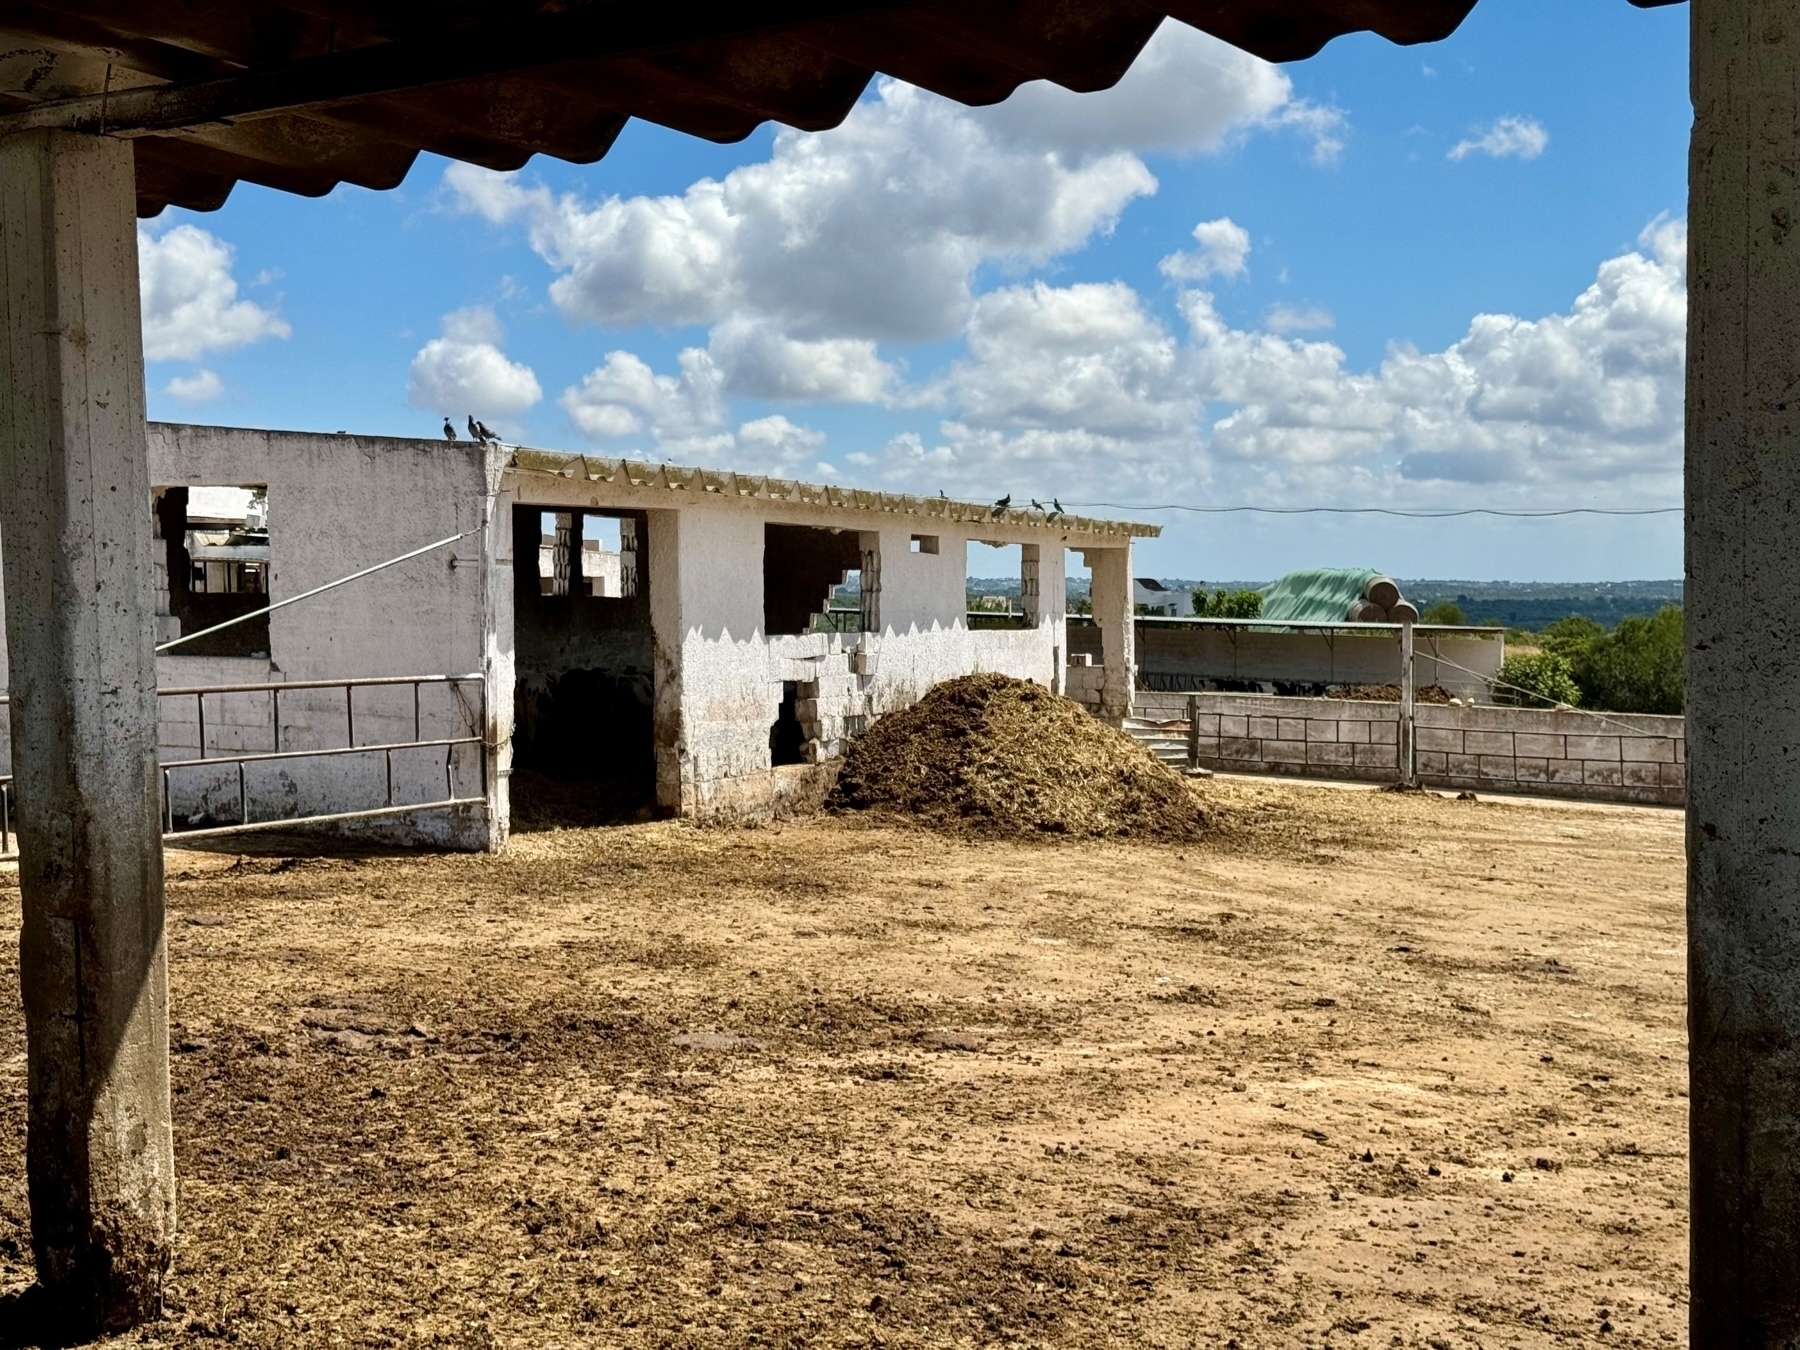 A livestock farm with a dirt-covered ground, a large manure pile, and several weathered concrete structures. Two pigeons are perched on one of the structures. The sky is partly cloudy.